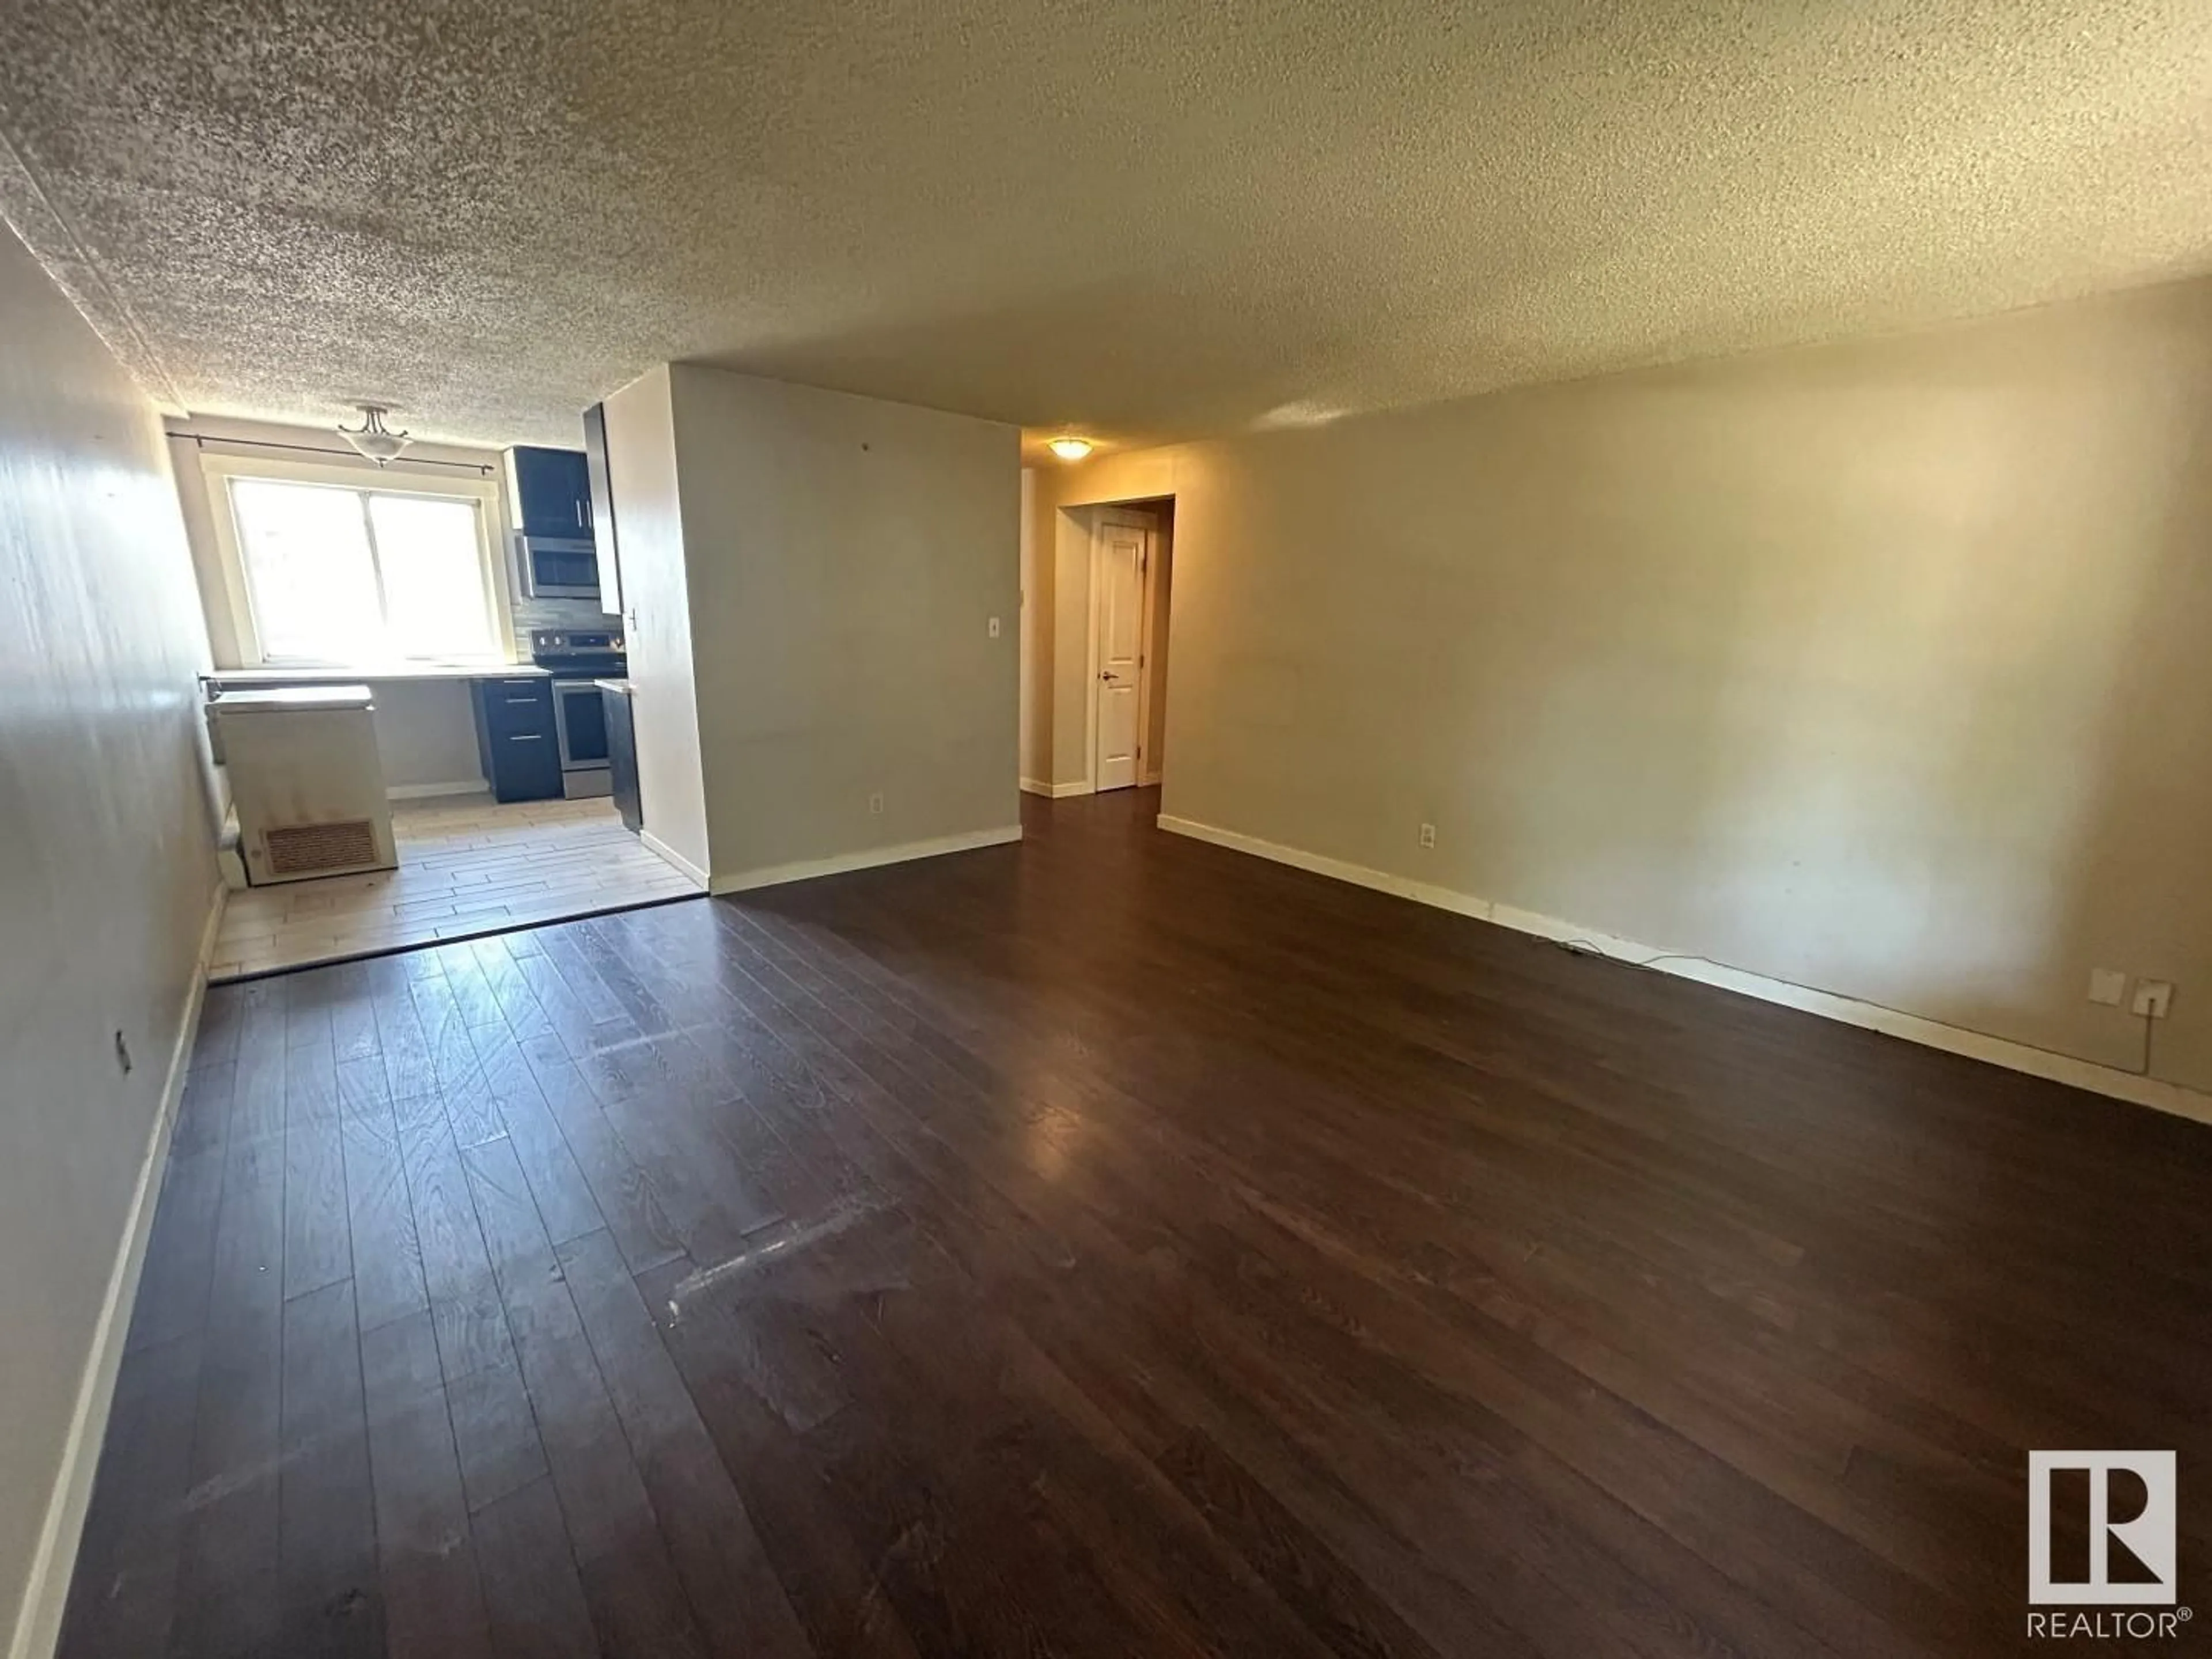 A pic of a room for #208 10644 113 ST NW, Edmonton Alberta T5H3H6